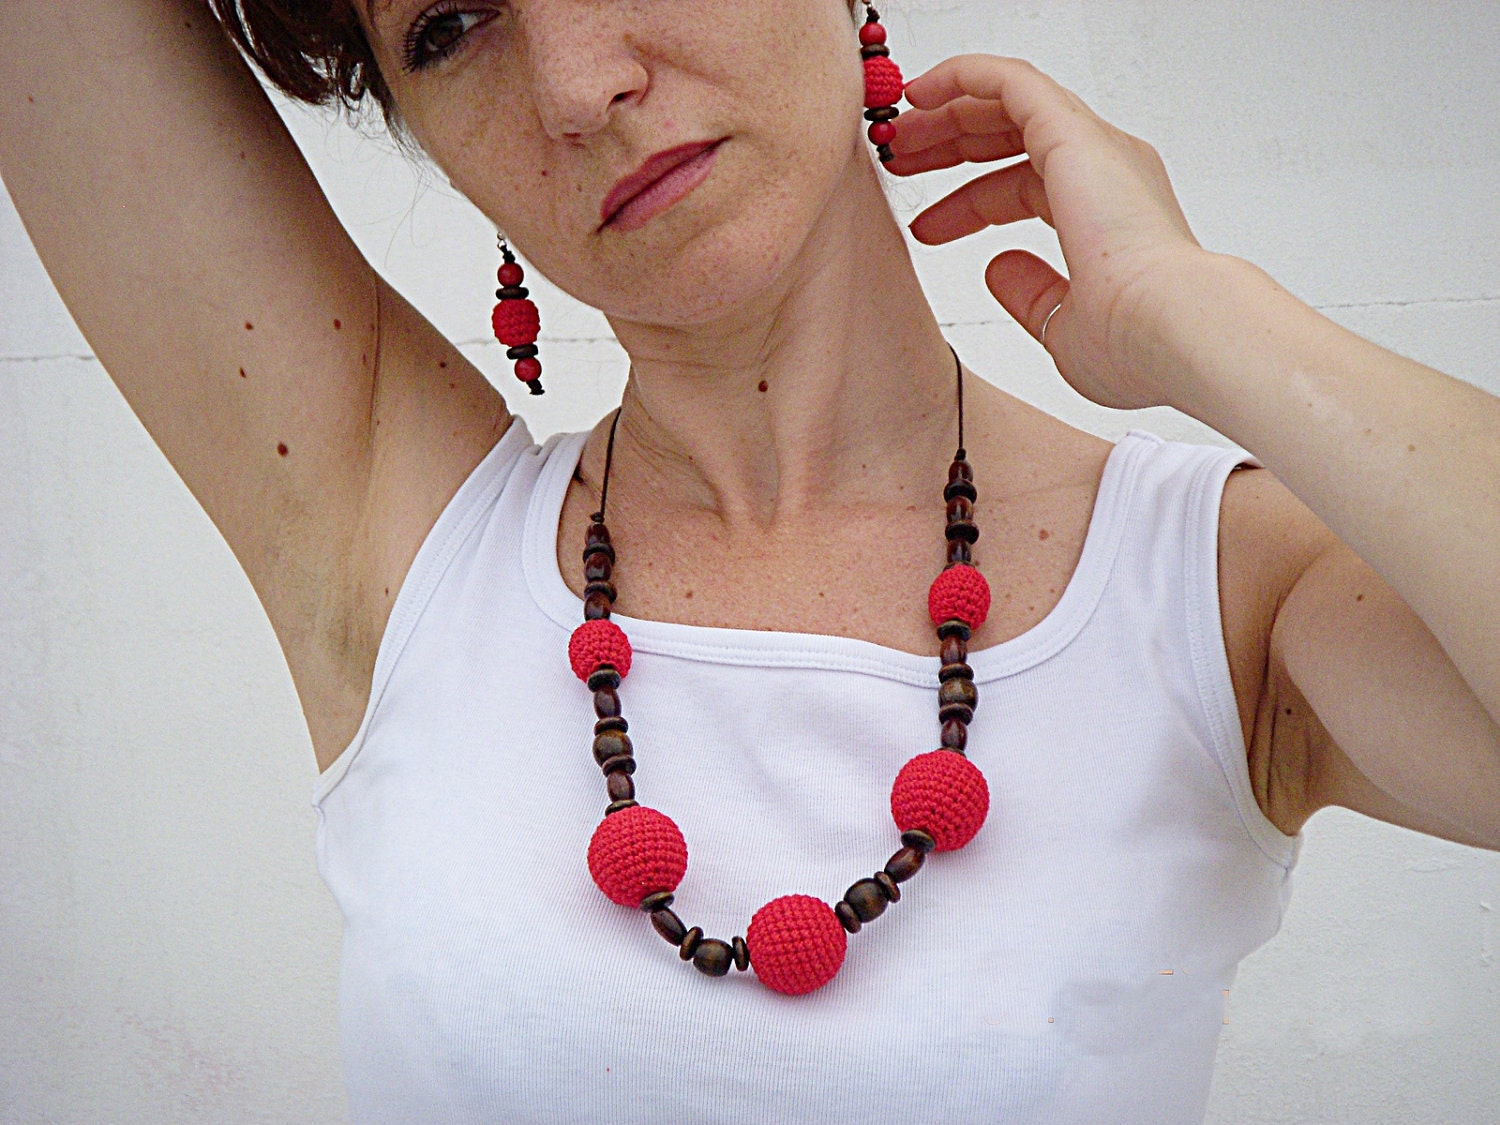 Crocheted necklace in red with  wooden beads - DesireKnitAndCrochet